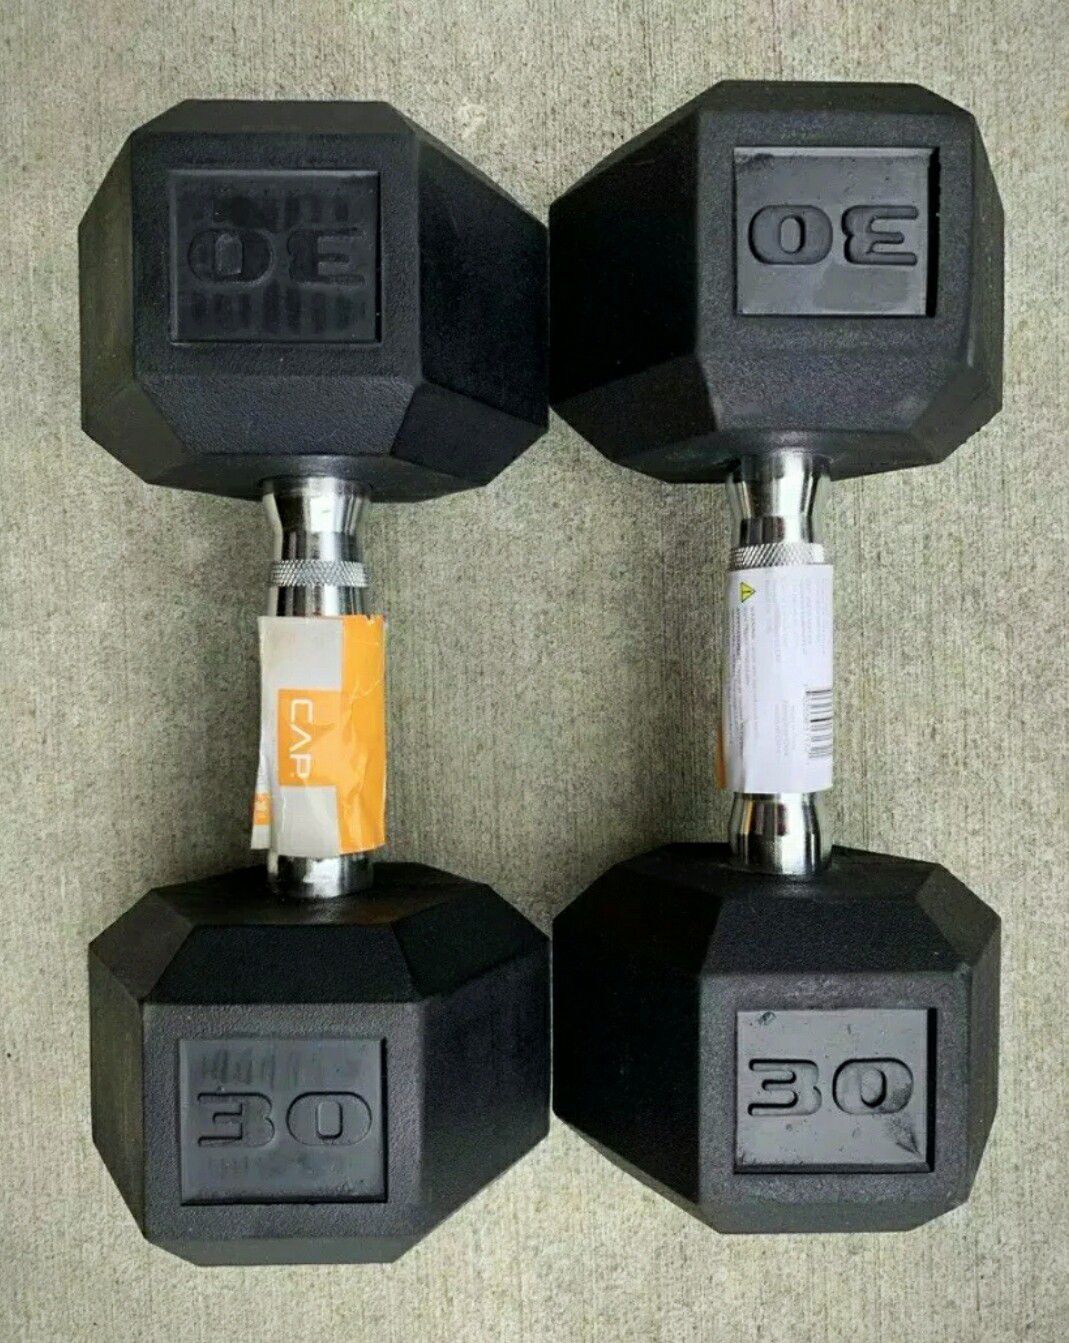 NEW 30lb Dumbbell Weights - Pair